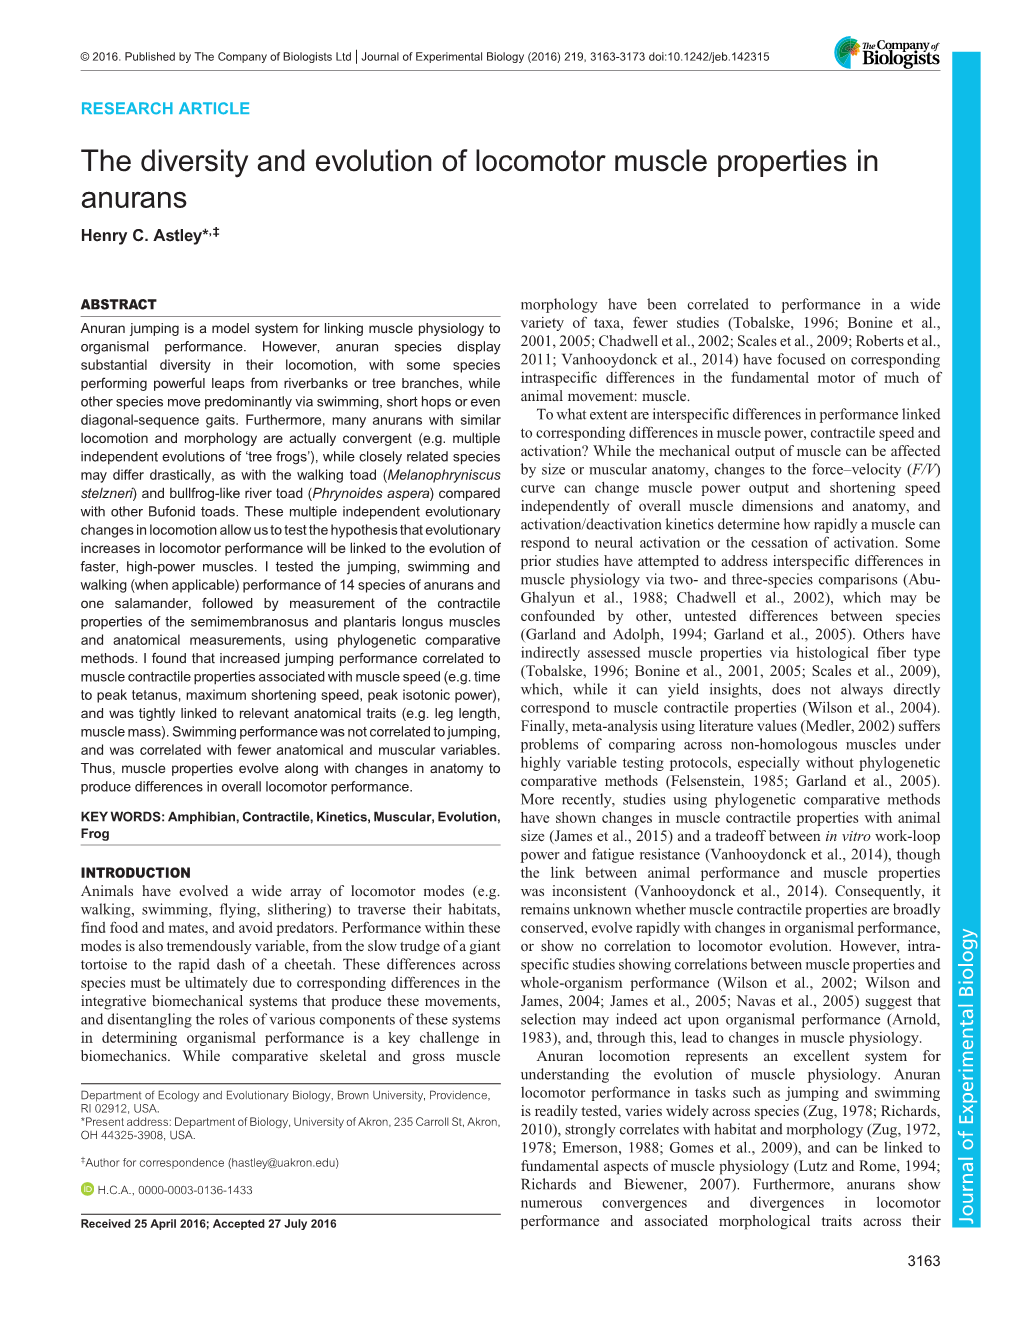 The Diversity and Evolution of Locomotor Muscle Properties in Anurans Henry C